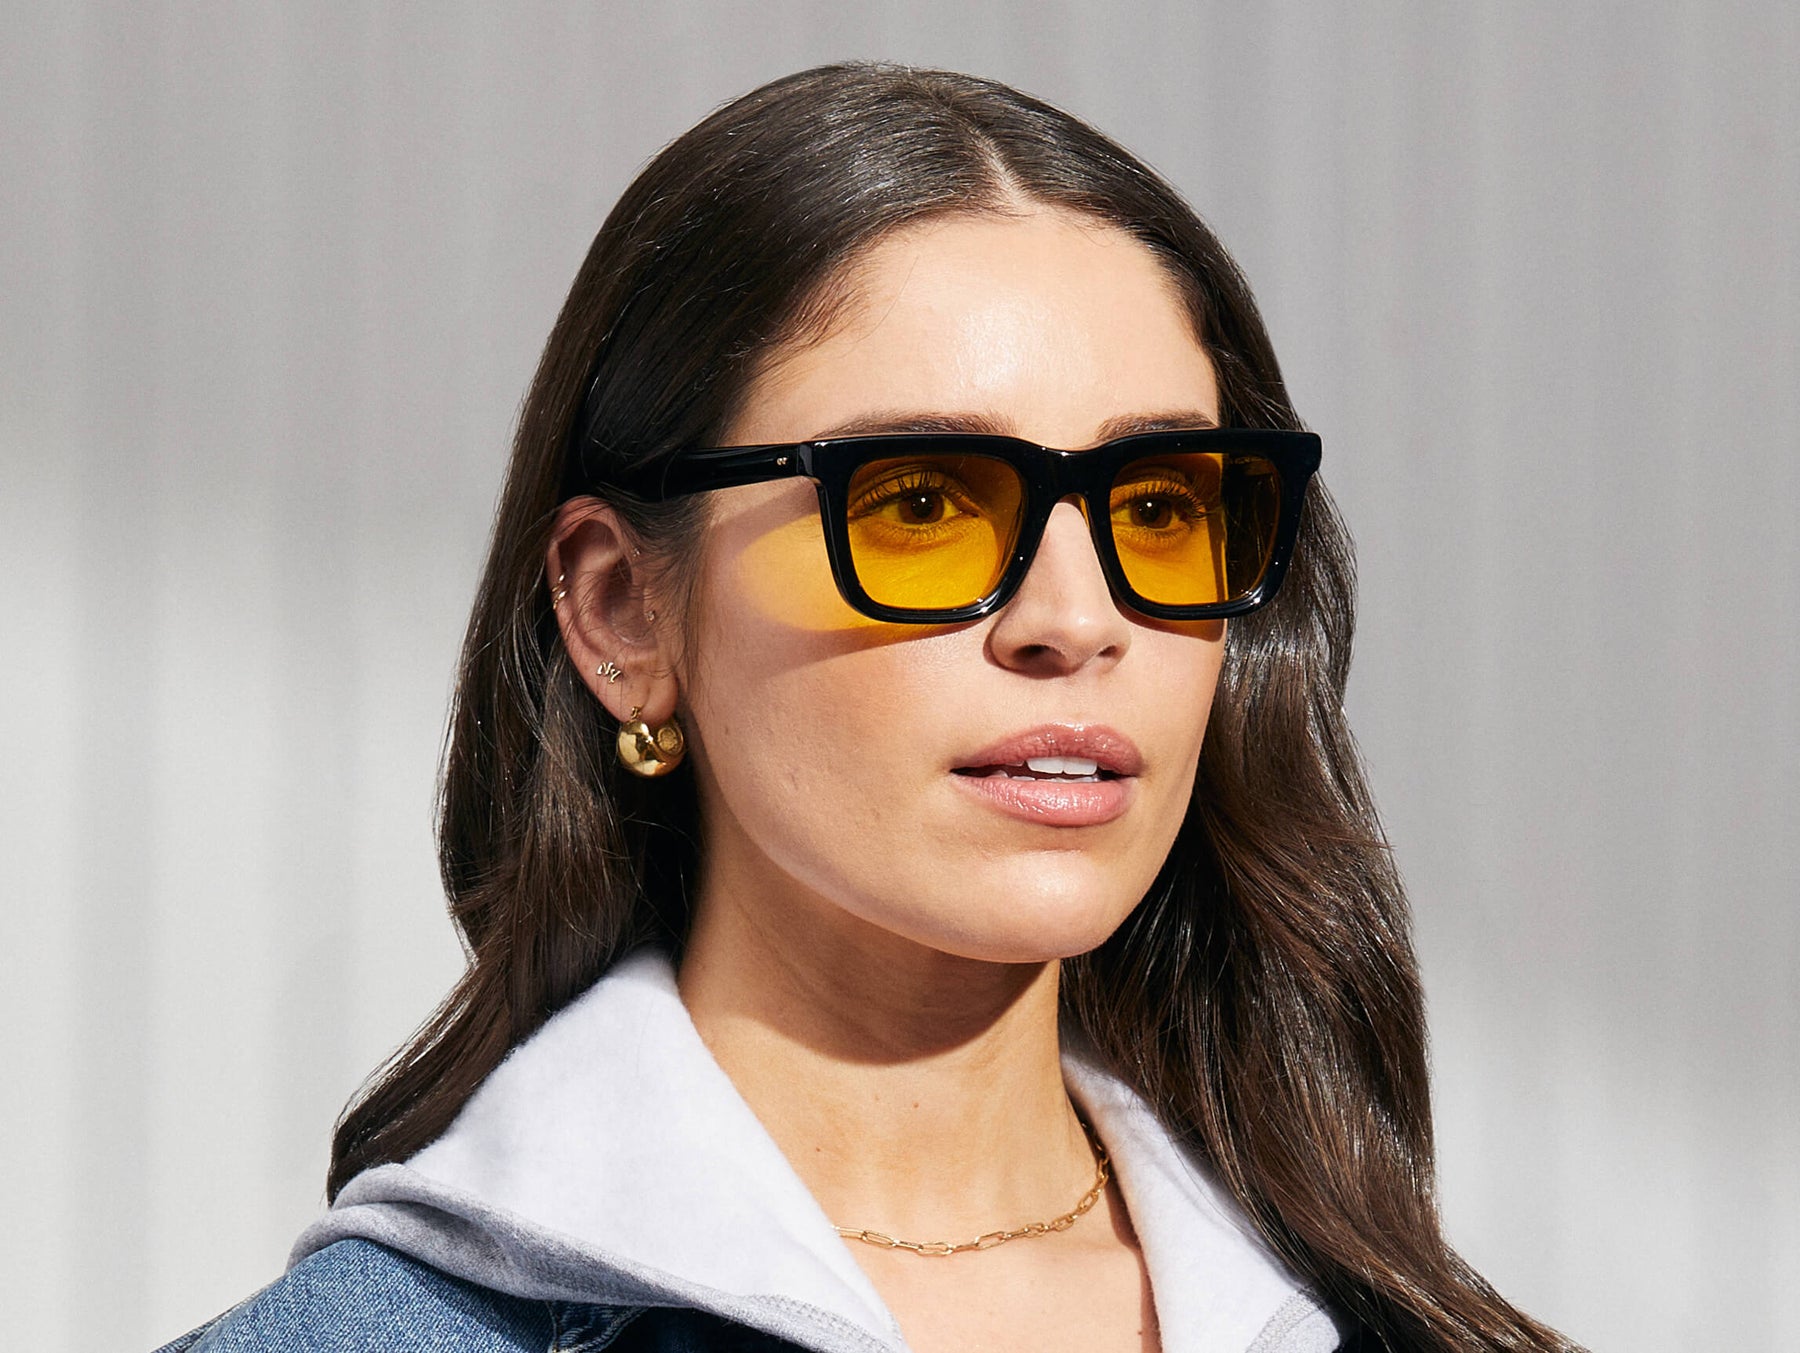 Model is wearing The RIZIK in Black in size 49 with Mellow Yellow Tinted Lenses